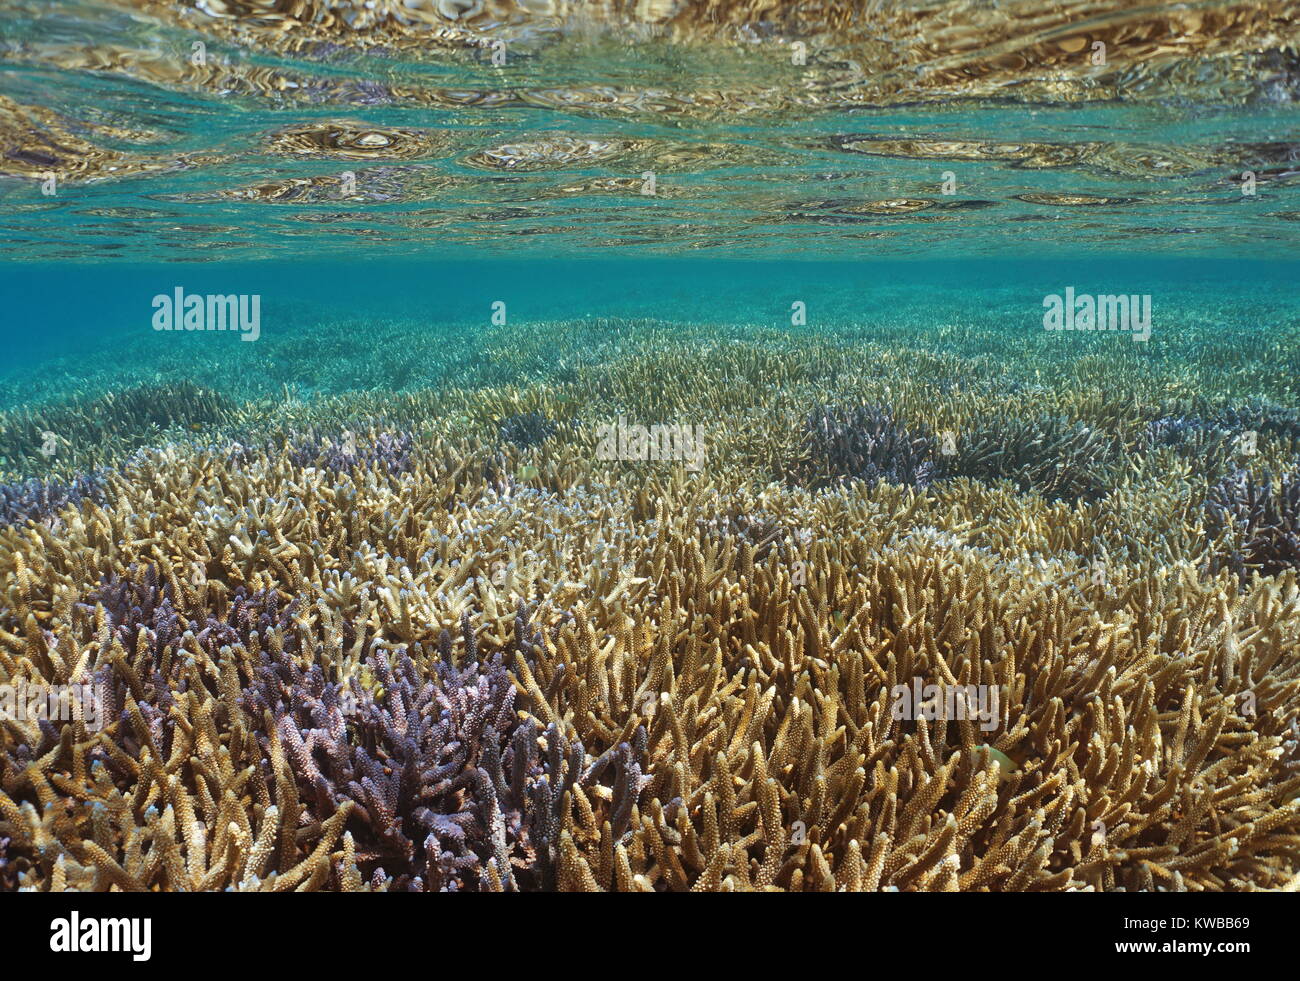 Pacific ocean shallow reef with Acropora staghorn corals under water surface, New Caledonia, Oceania Stock Photo